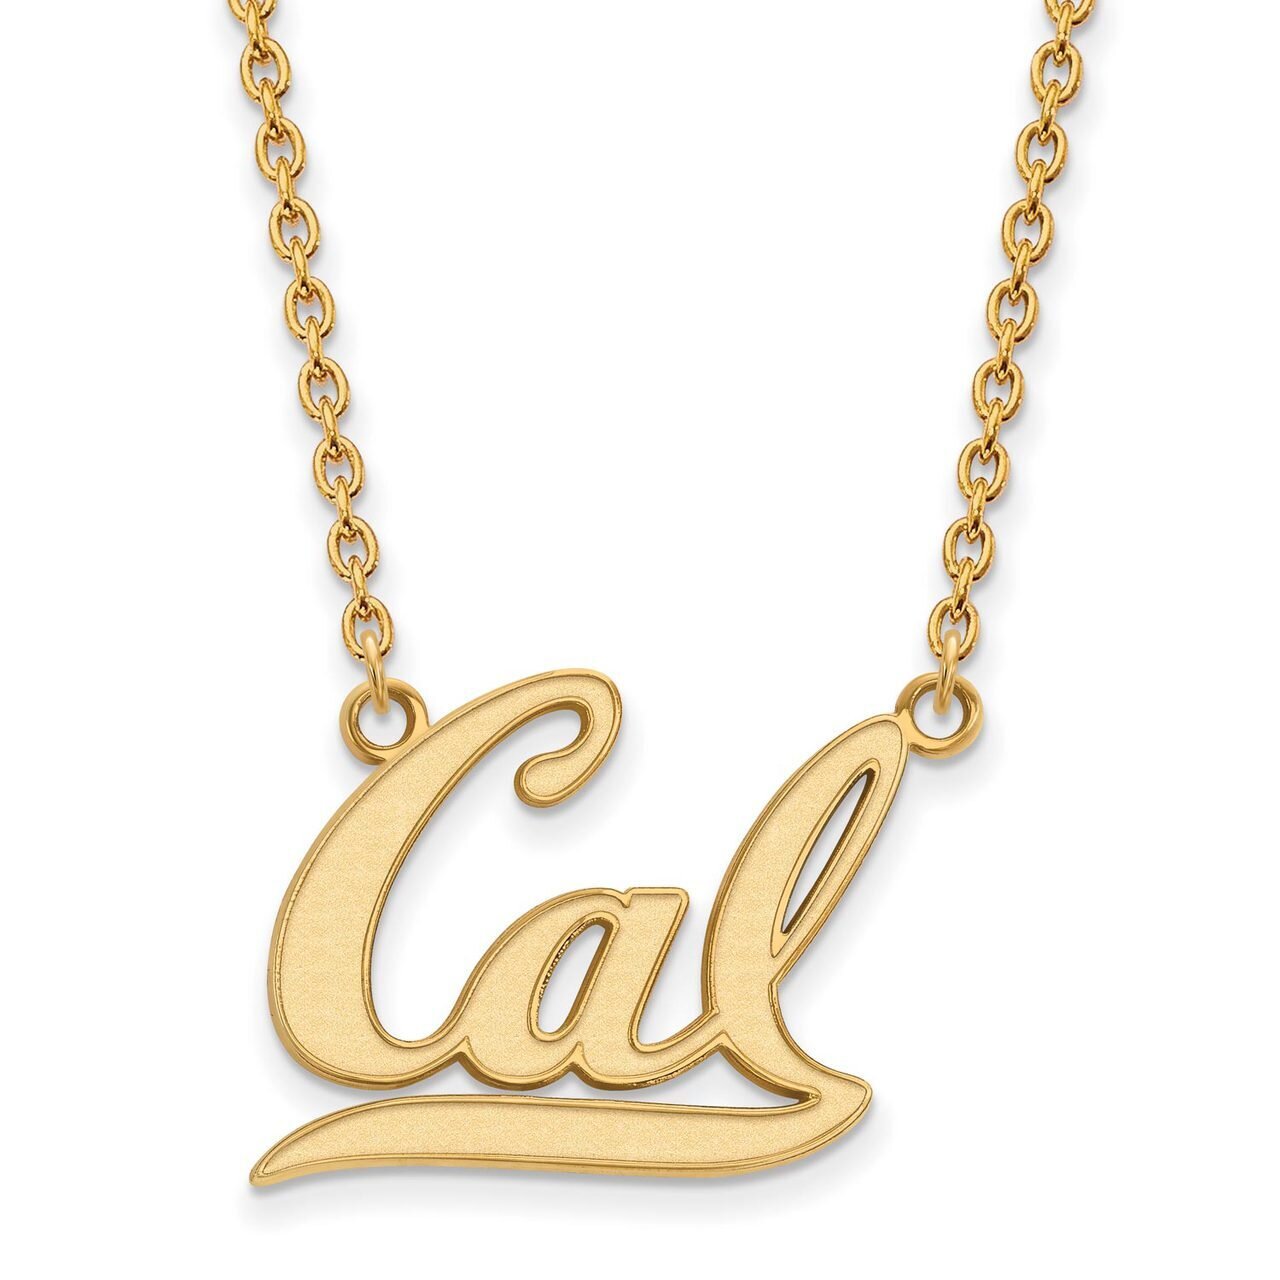 University of California Berkeley Large Pendant with Chain Necklace 14k Yellow Gold 4Y012UCB-18